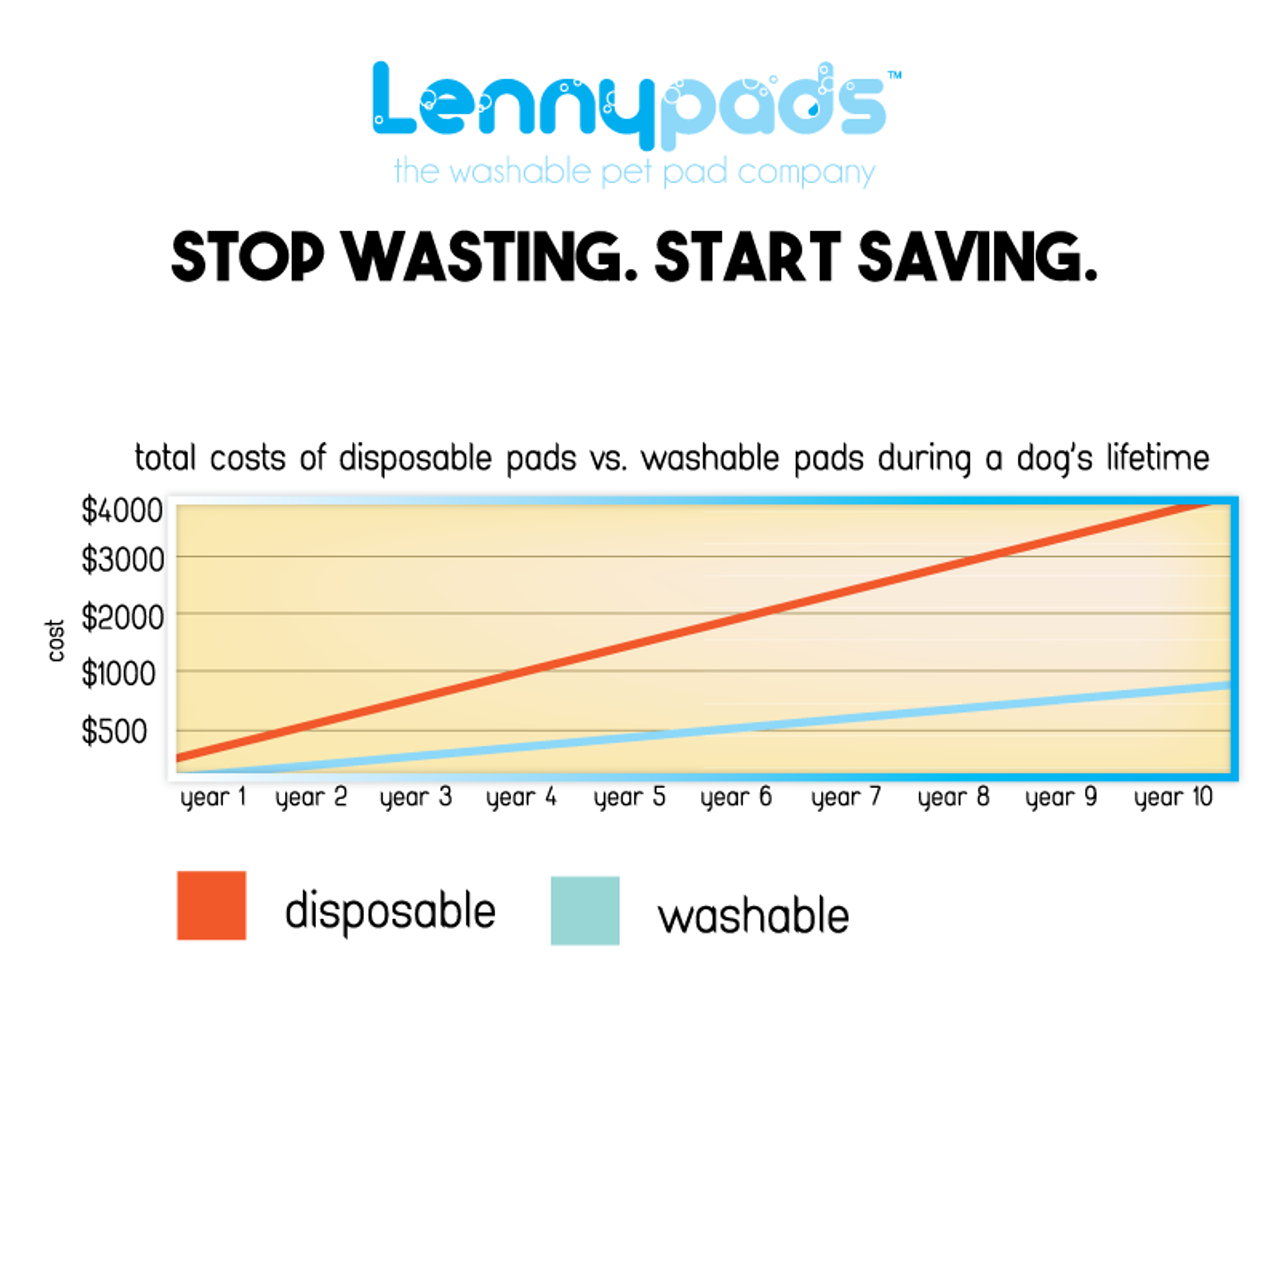 Lennypads cost savings over disposables